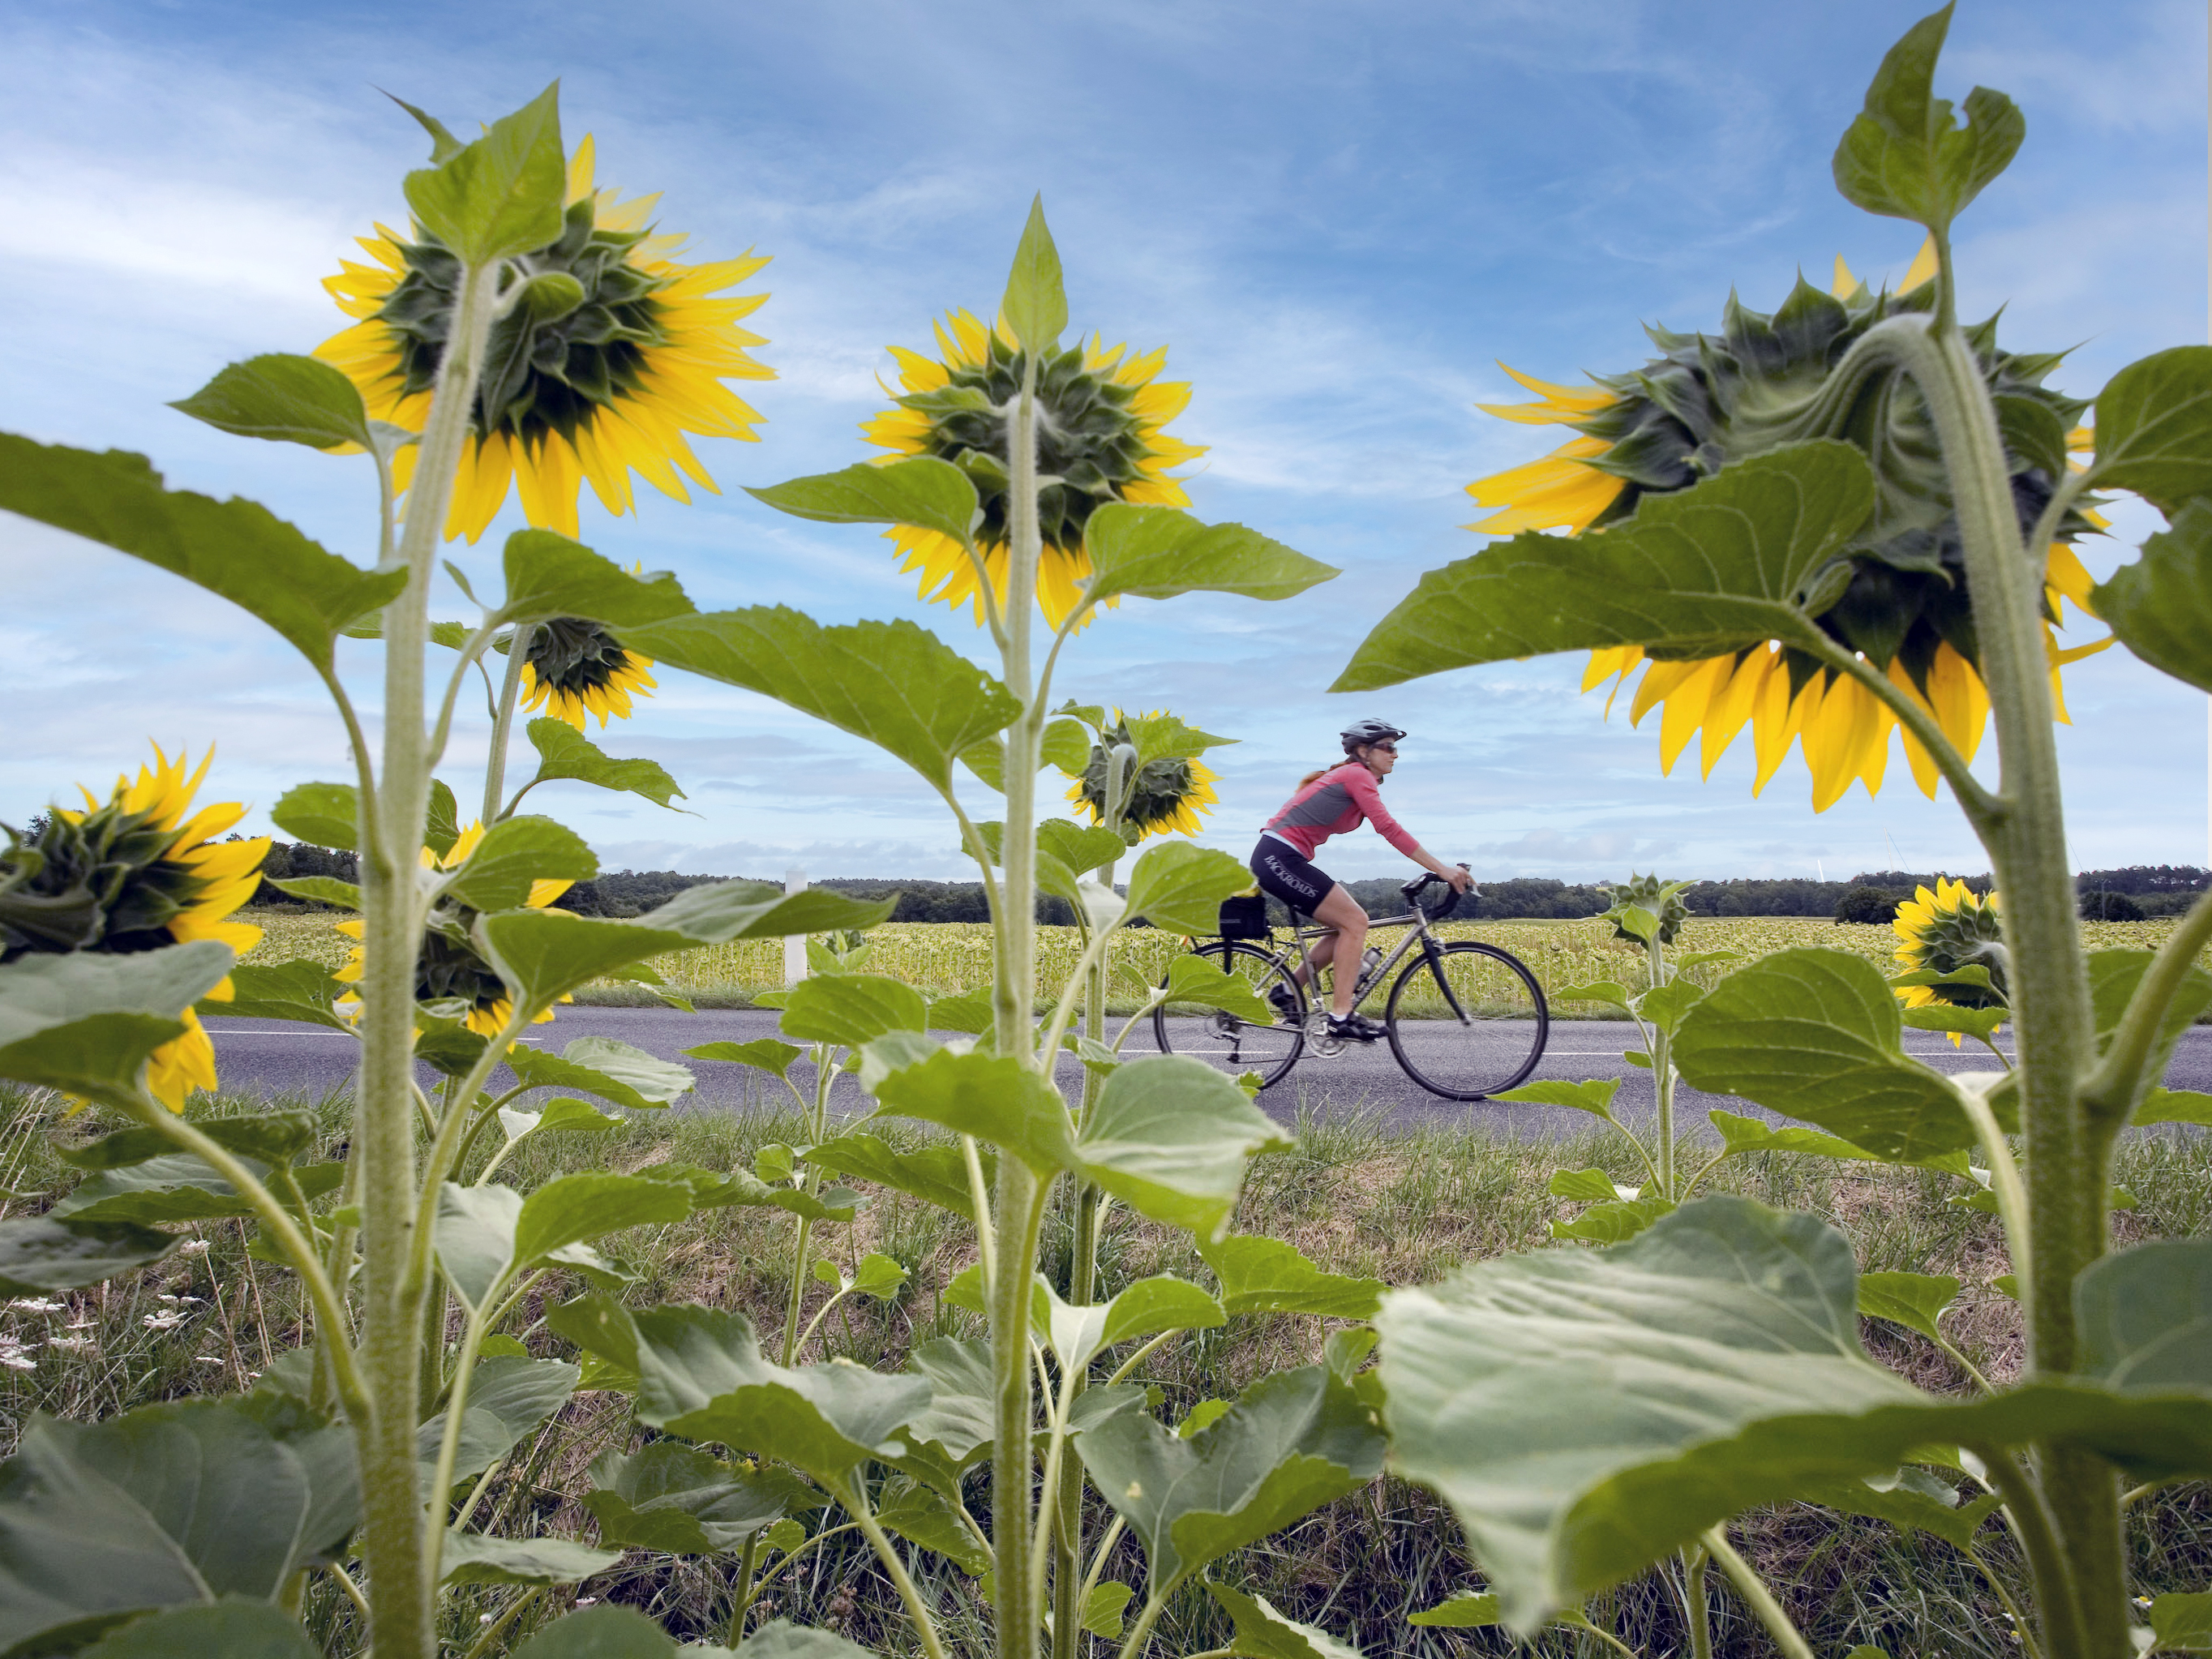 Sunflowers blooming alongside a road with biker riding in the background.